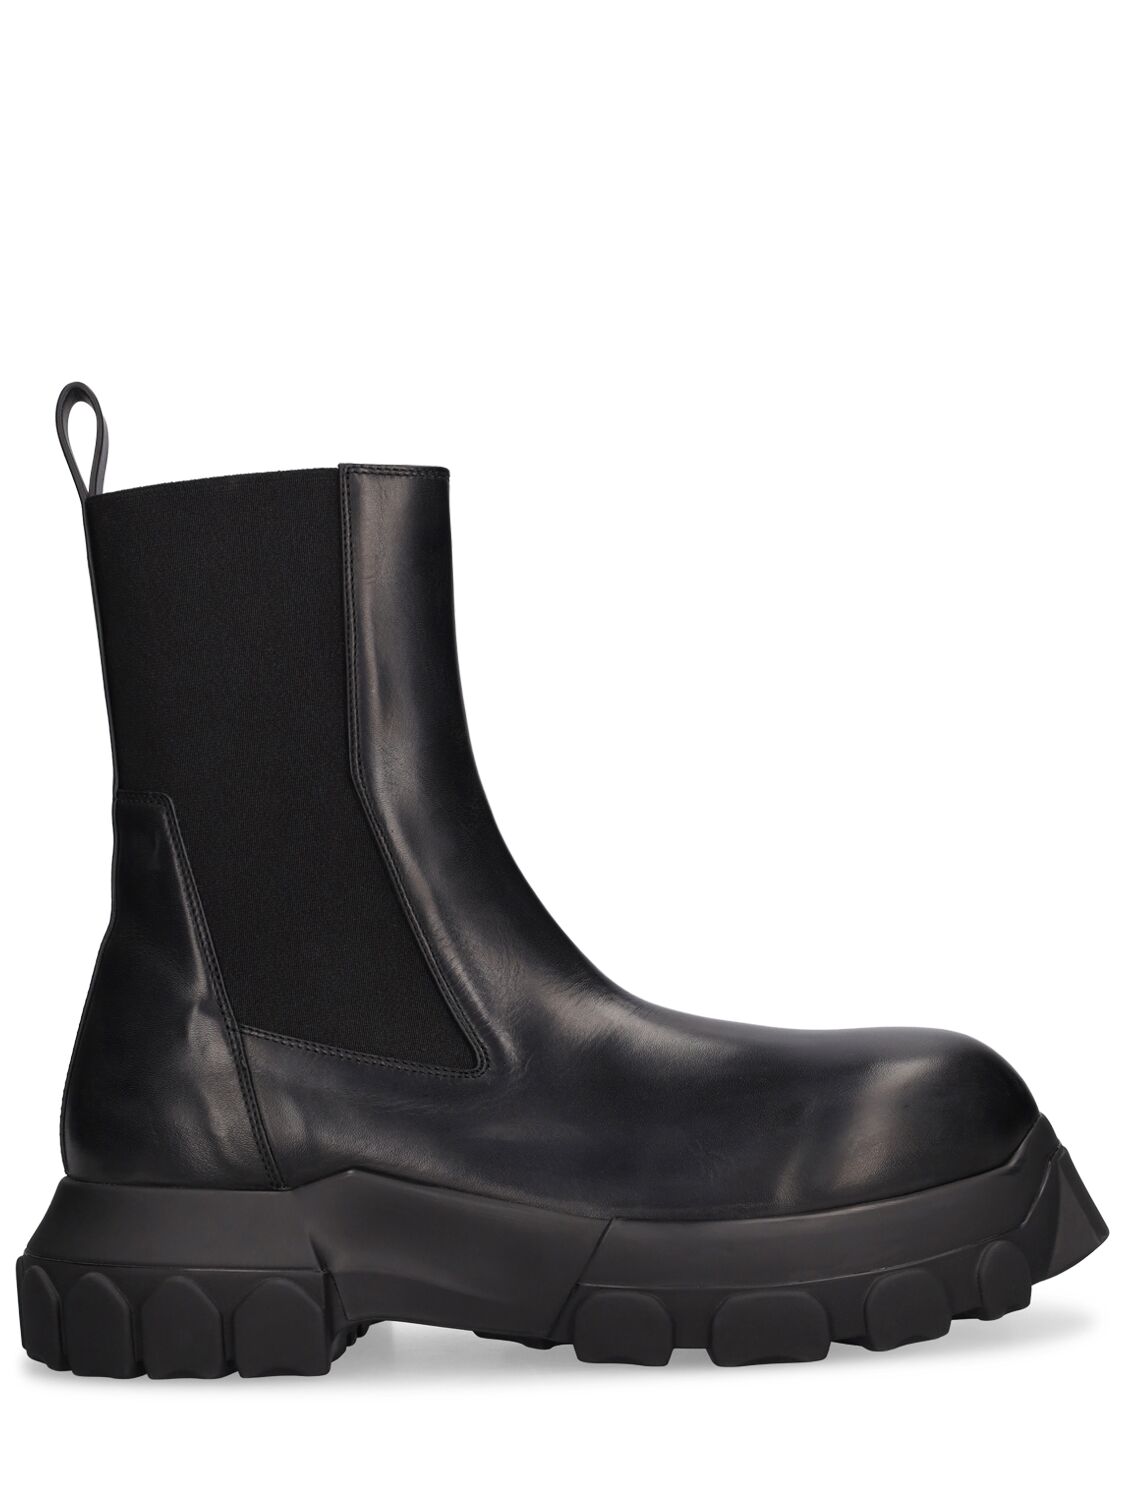 Rick Owens Beatle Bozo Tractor Leather Boots In Black